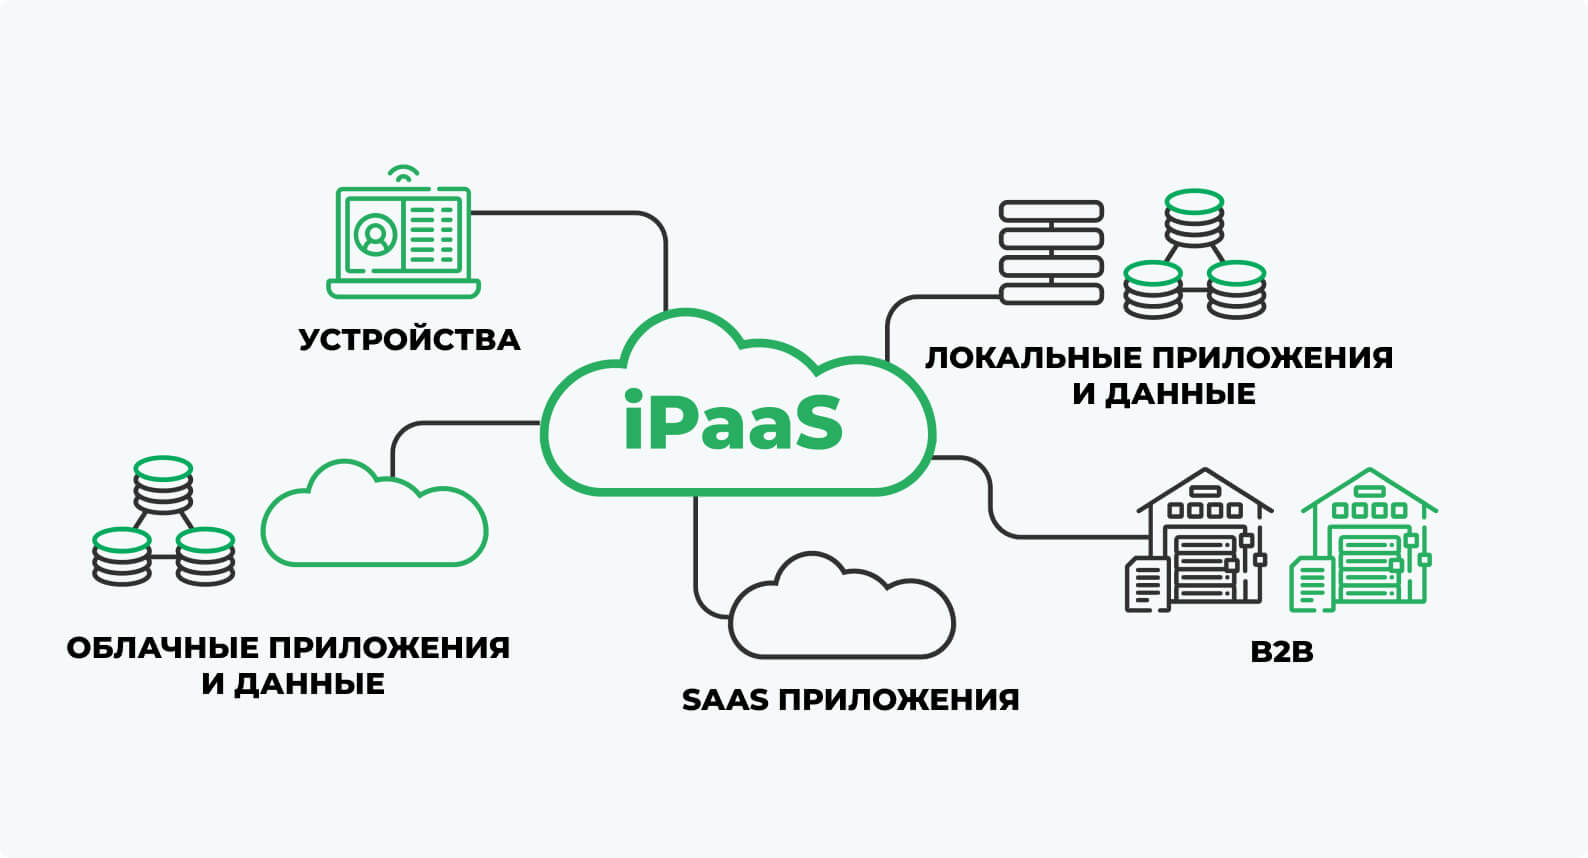 Apps and data management and integration in iPaaS